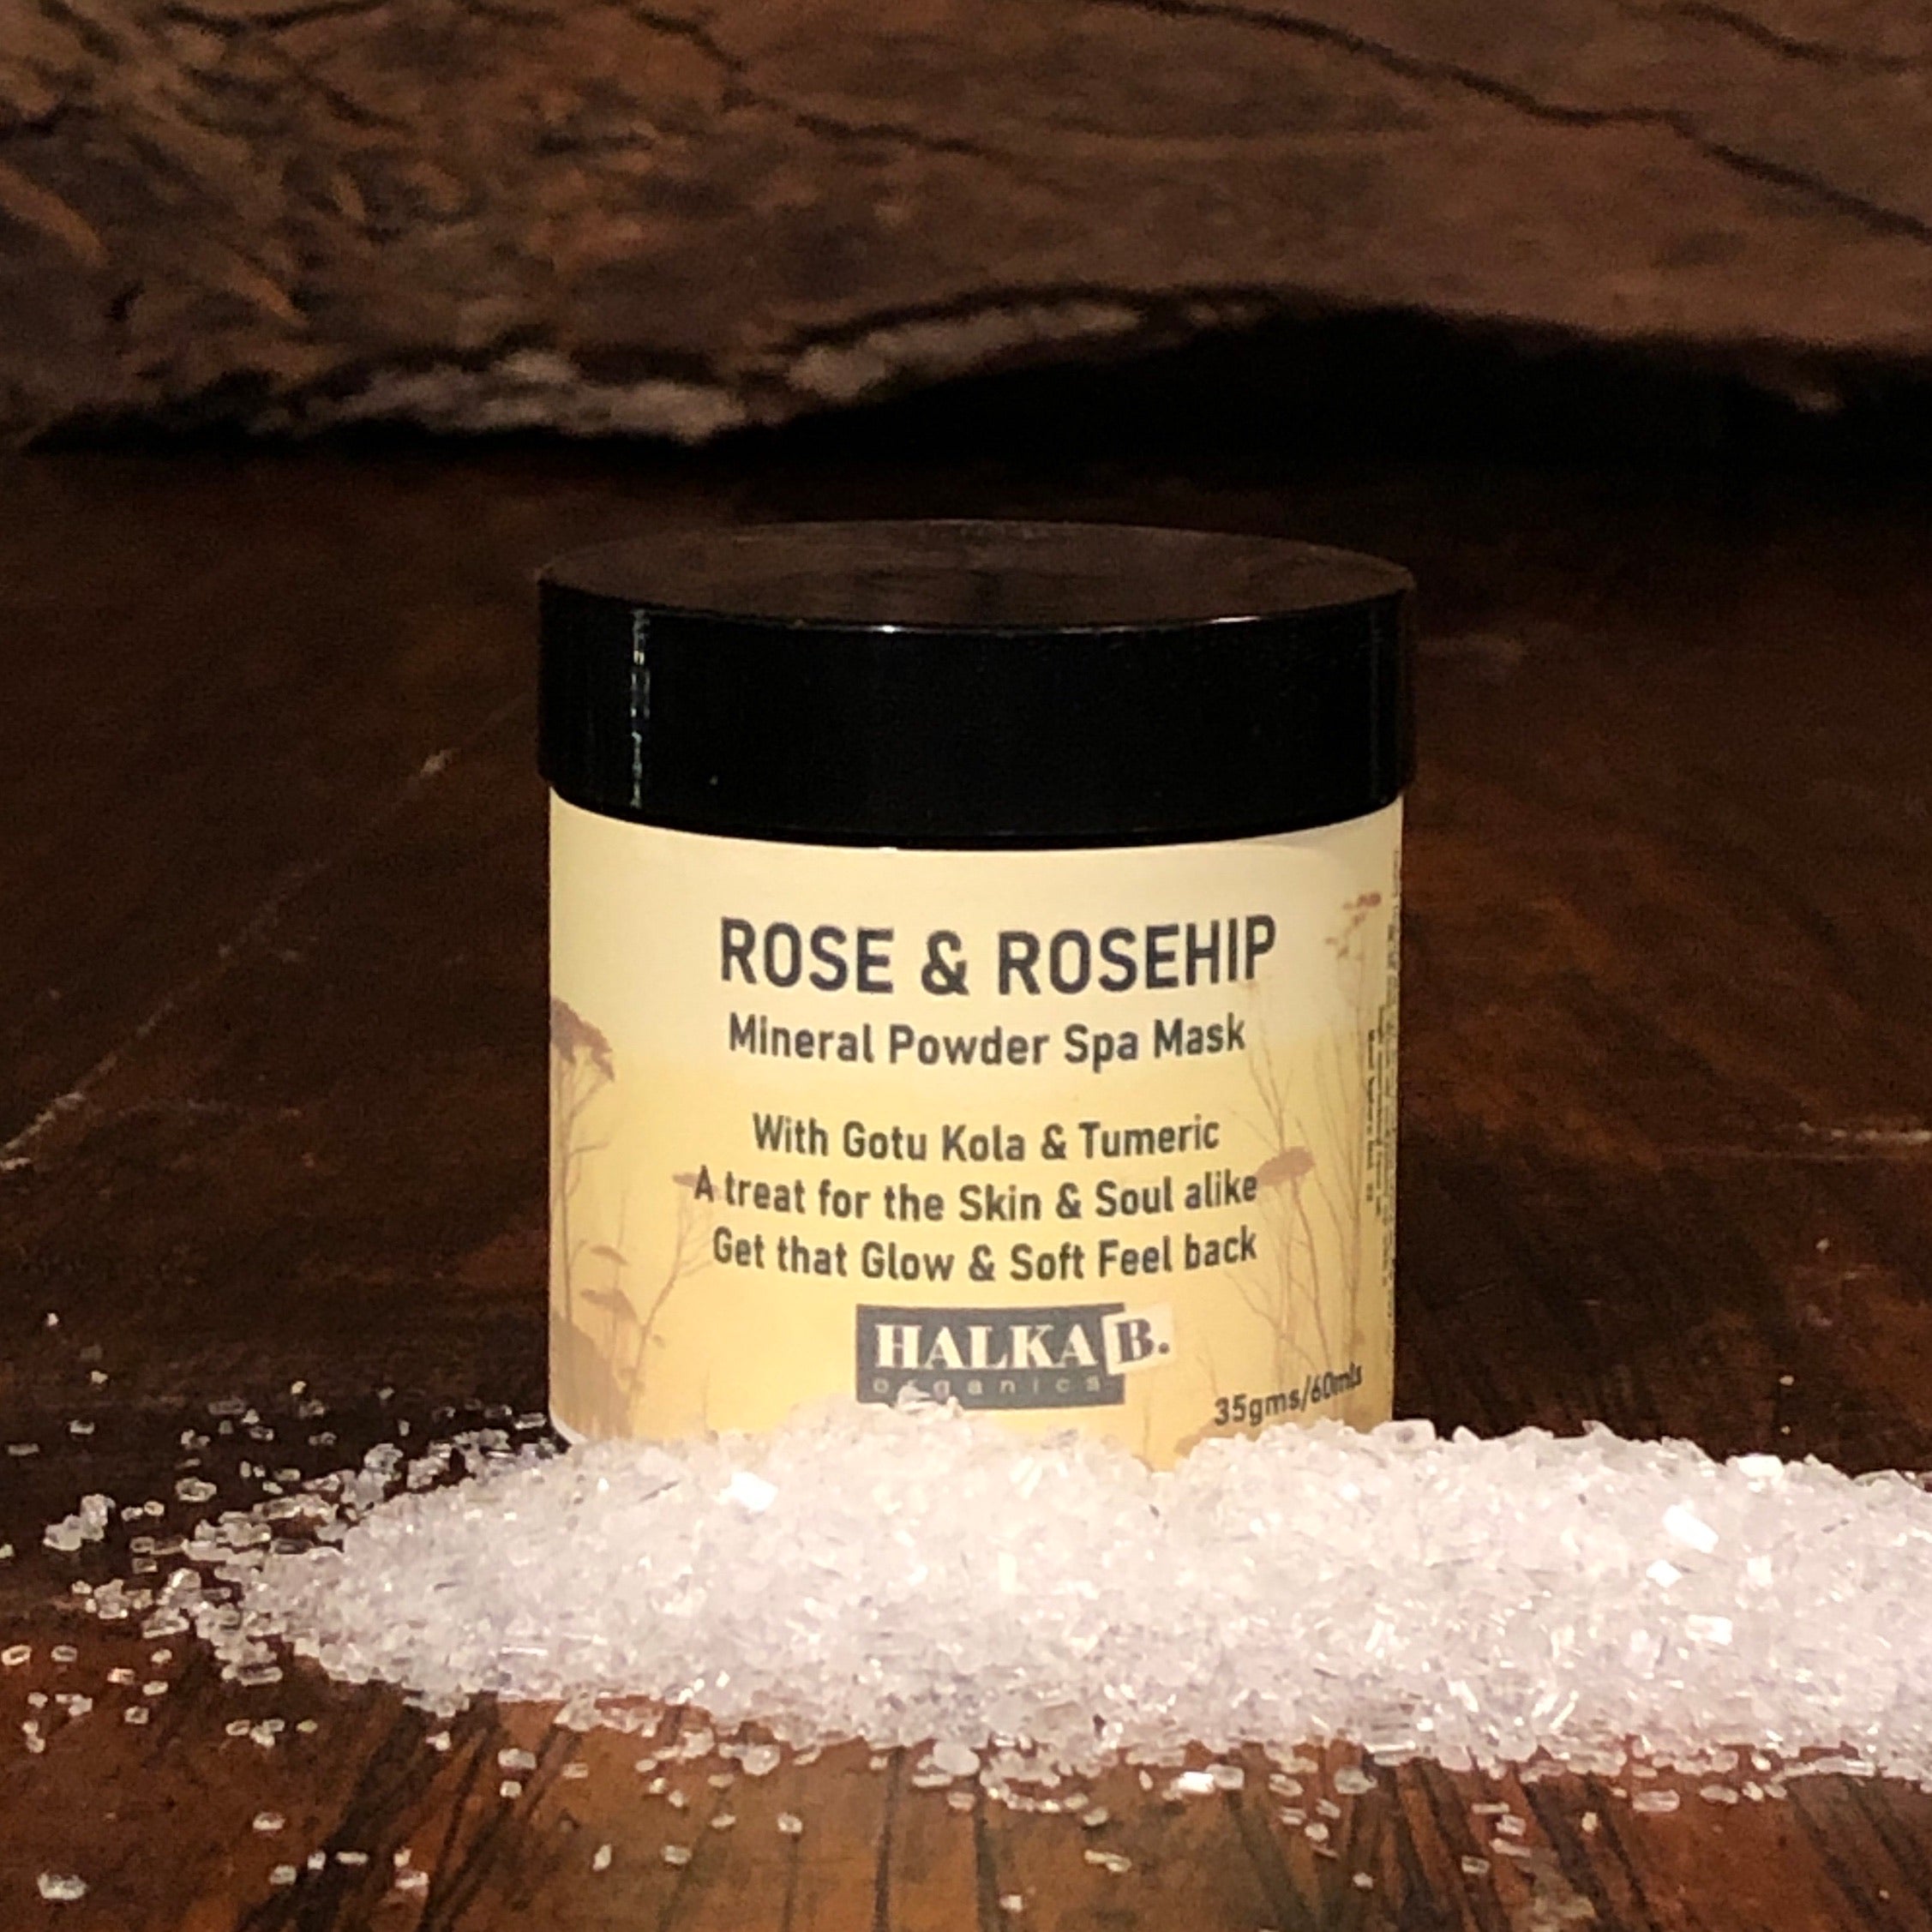 Rose & Rosehip Powder Mask Get that glow and soft feel back for normal to dry skin